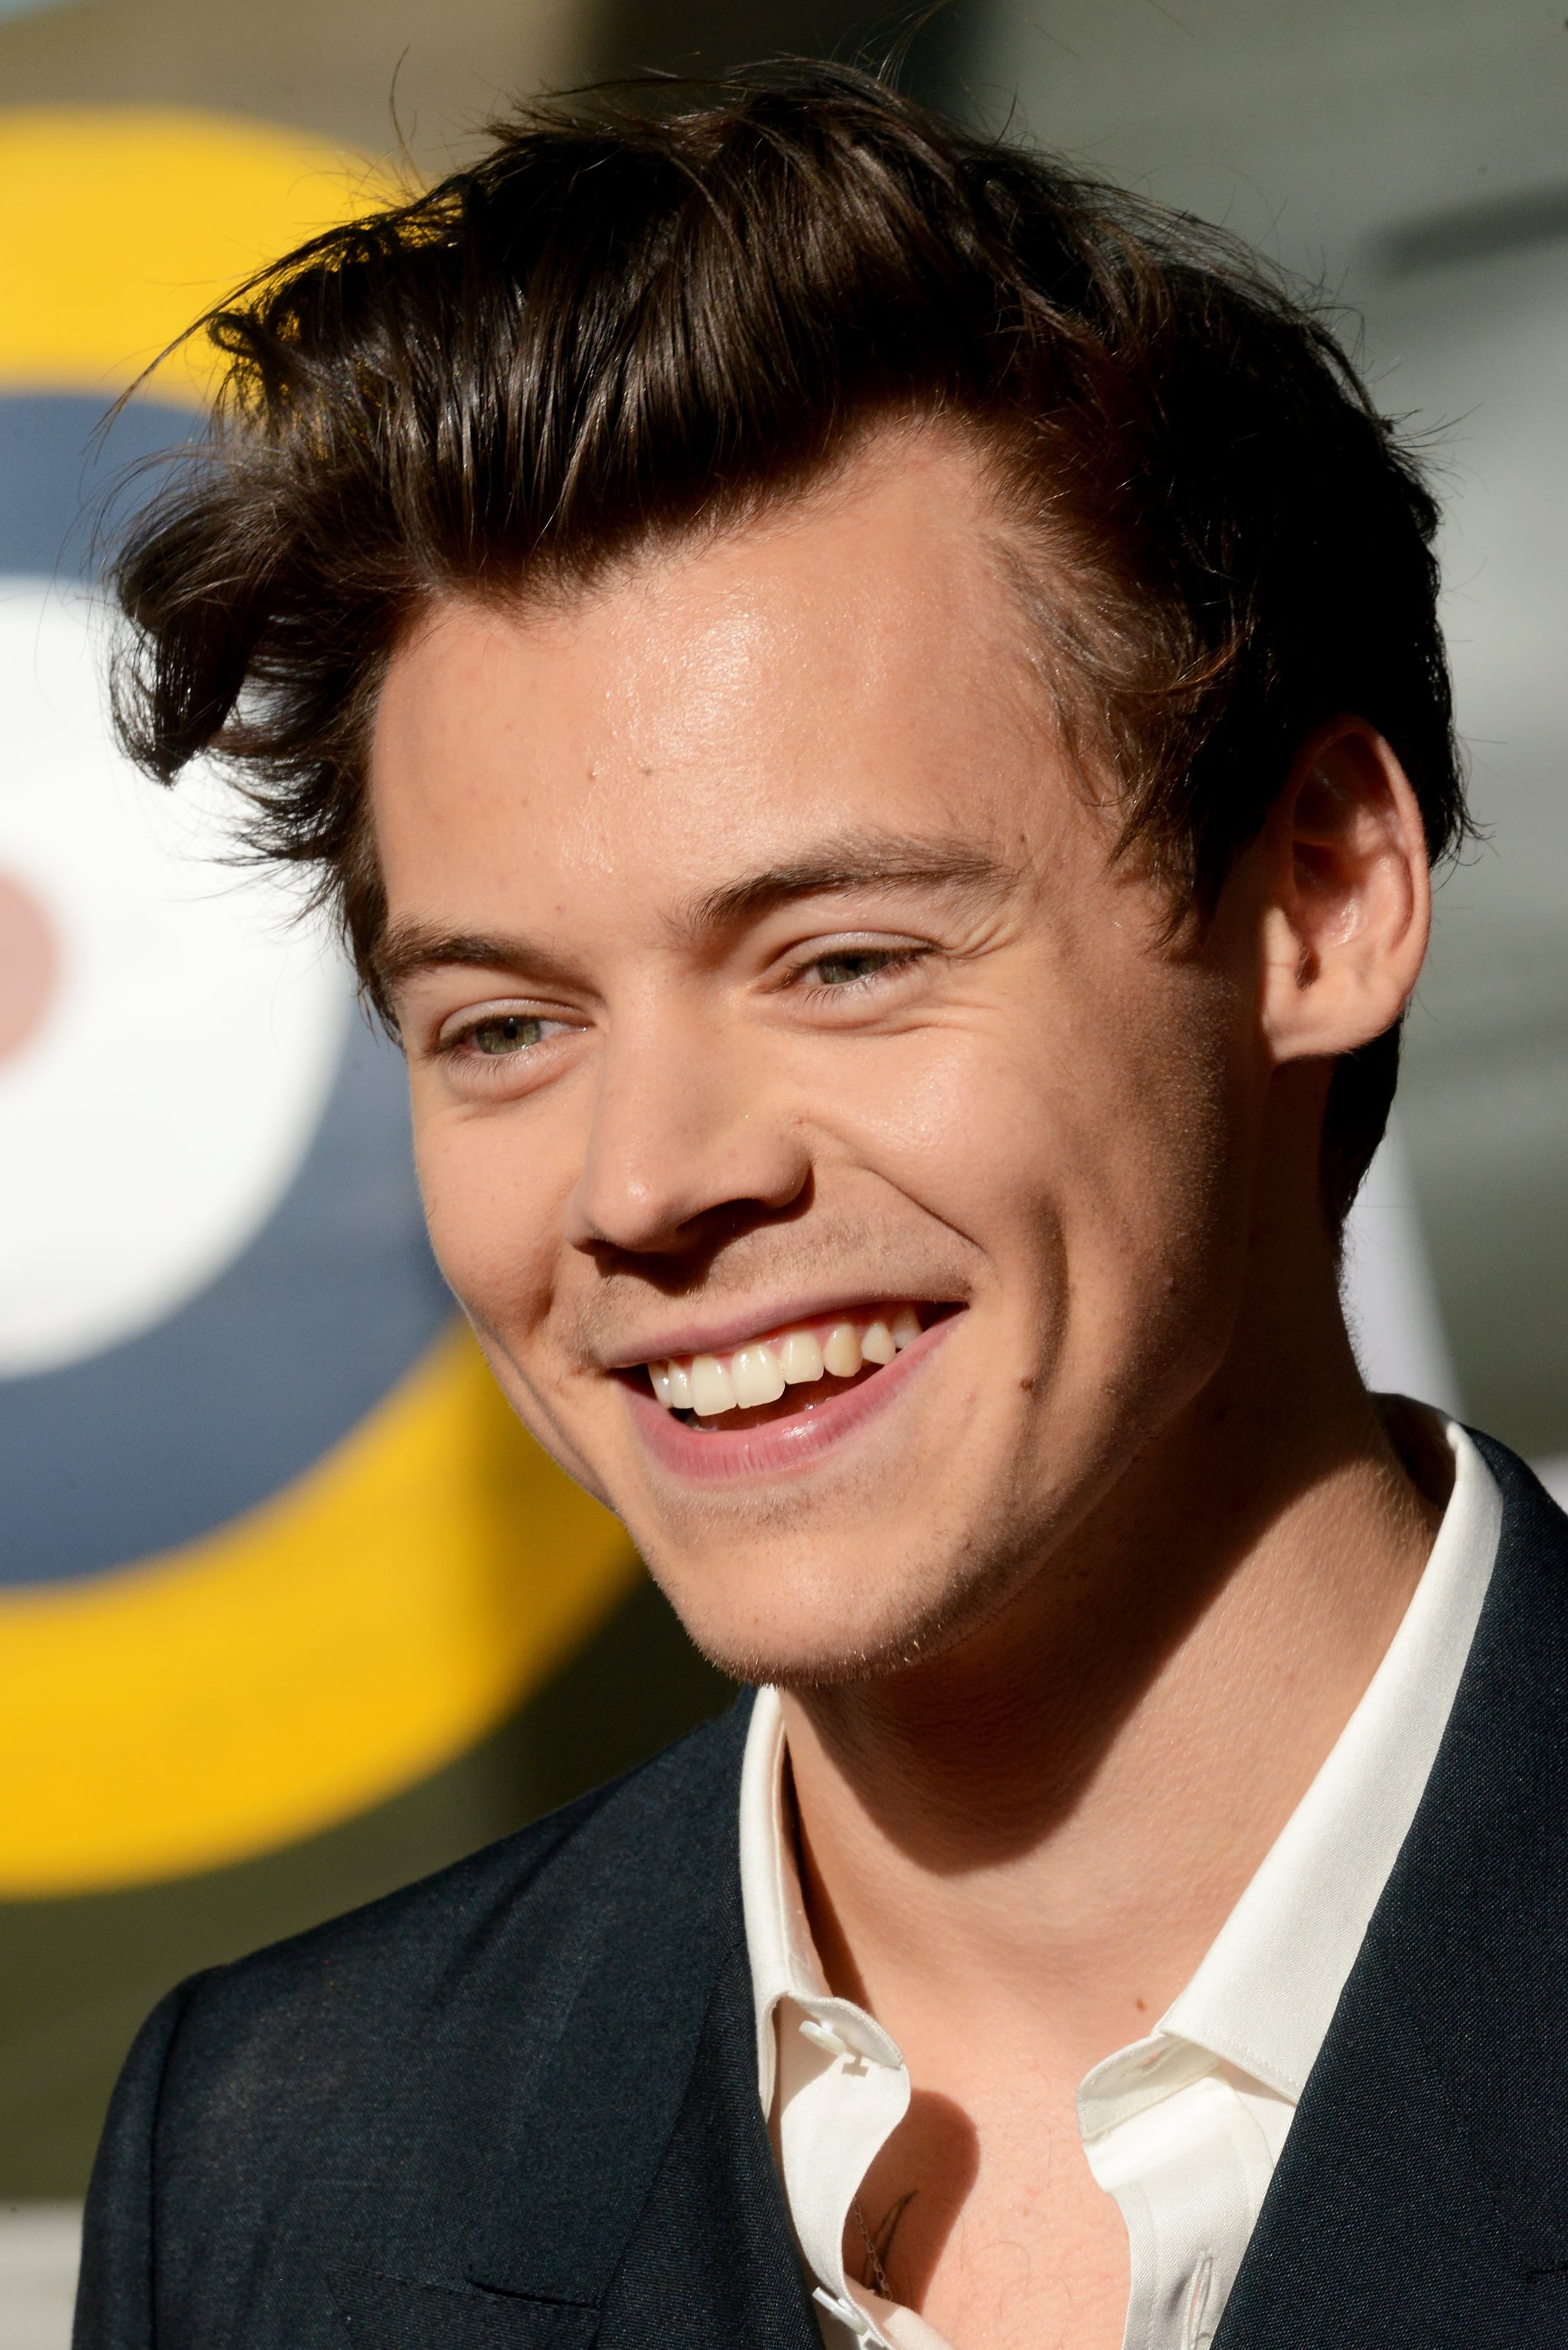 Pictures Of Harry Styles Smiling And Laughing Popsugar Celebrity